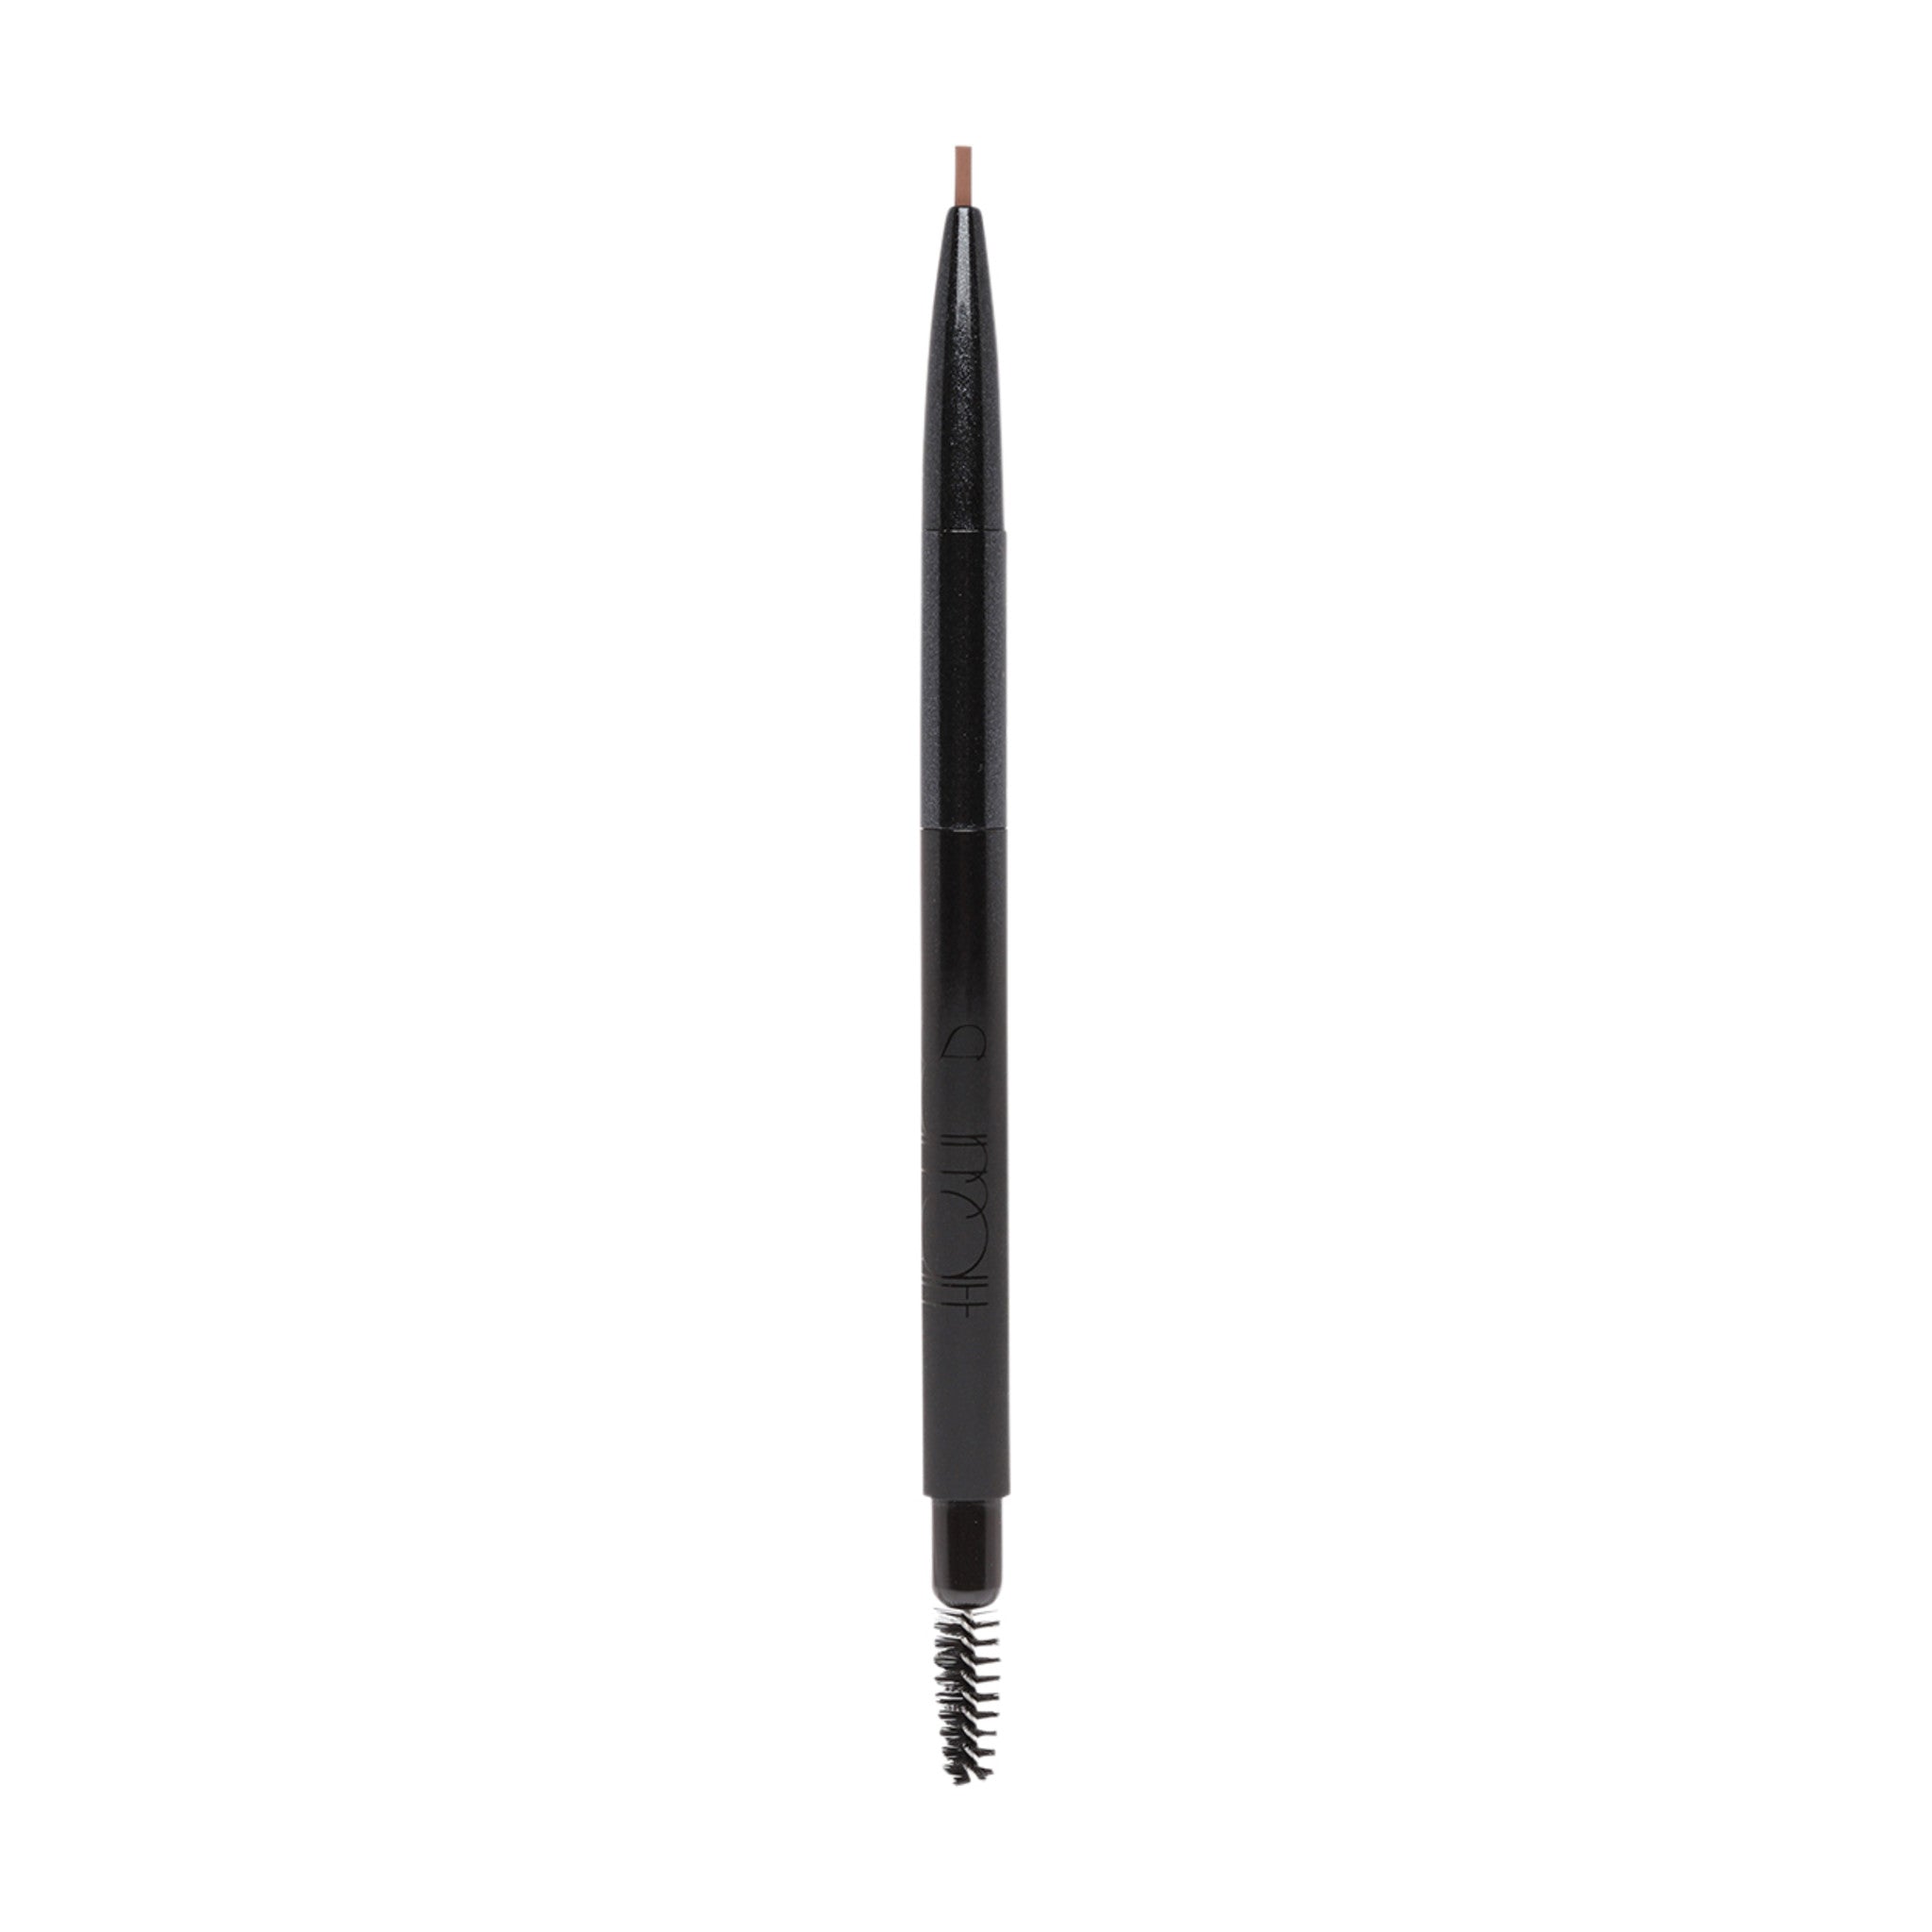 Surratt Expressioniste Brow Pencil Refill Cartridge Color/Shade variant: Rousse main image.